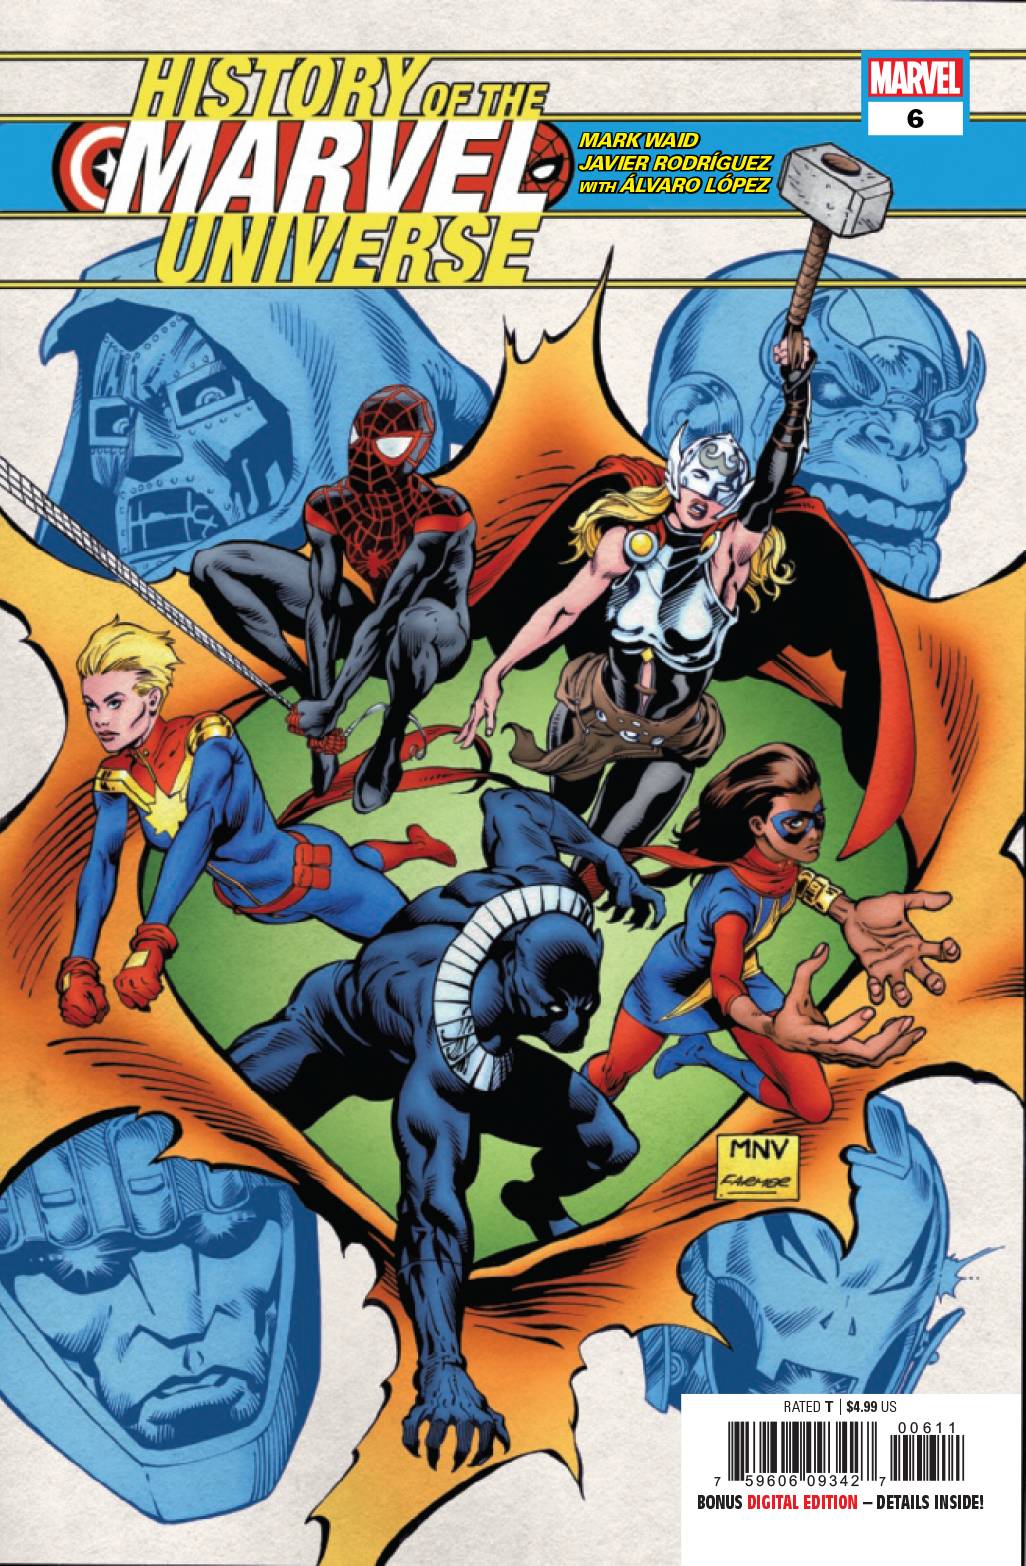 HISTORY OF MARVEL UNIVERSE #6 (OF 6)